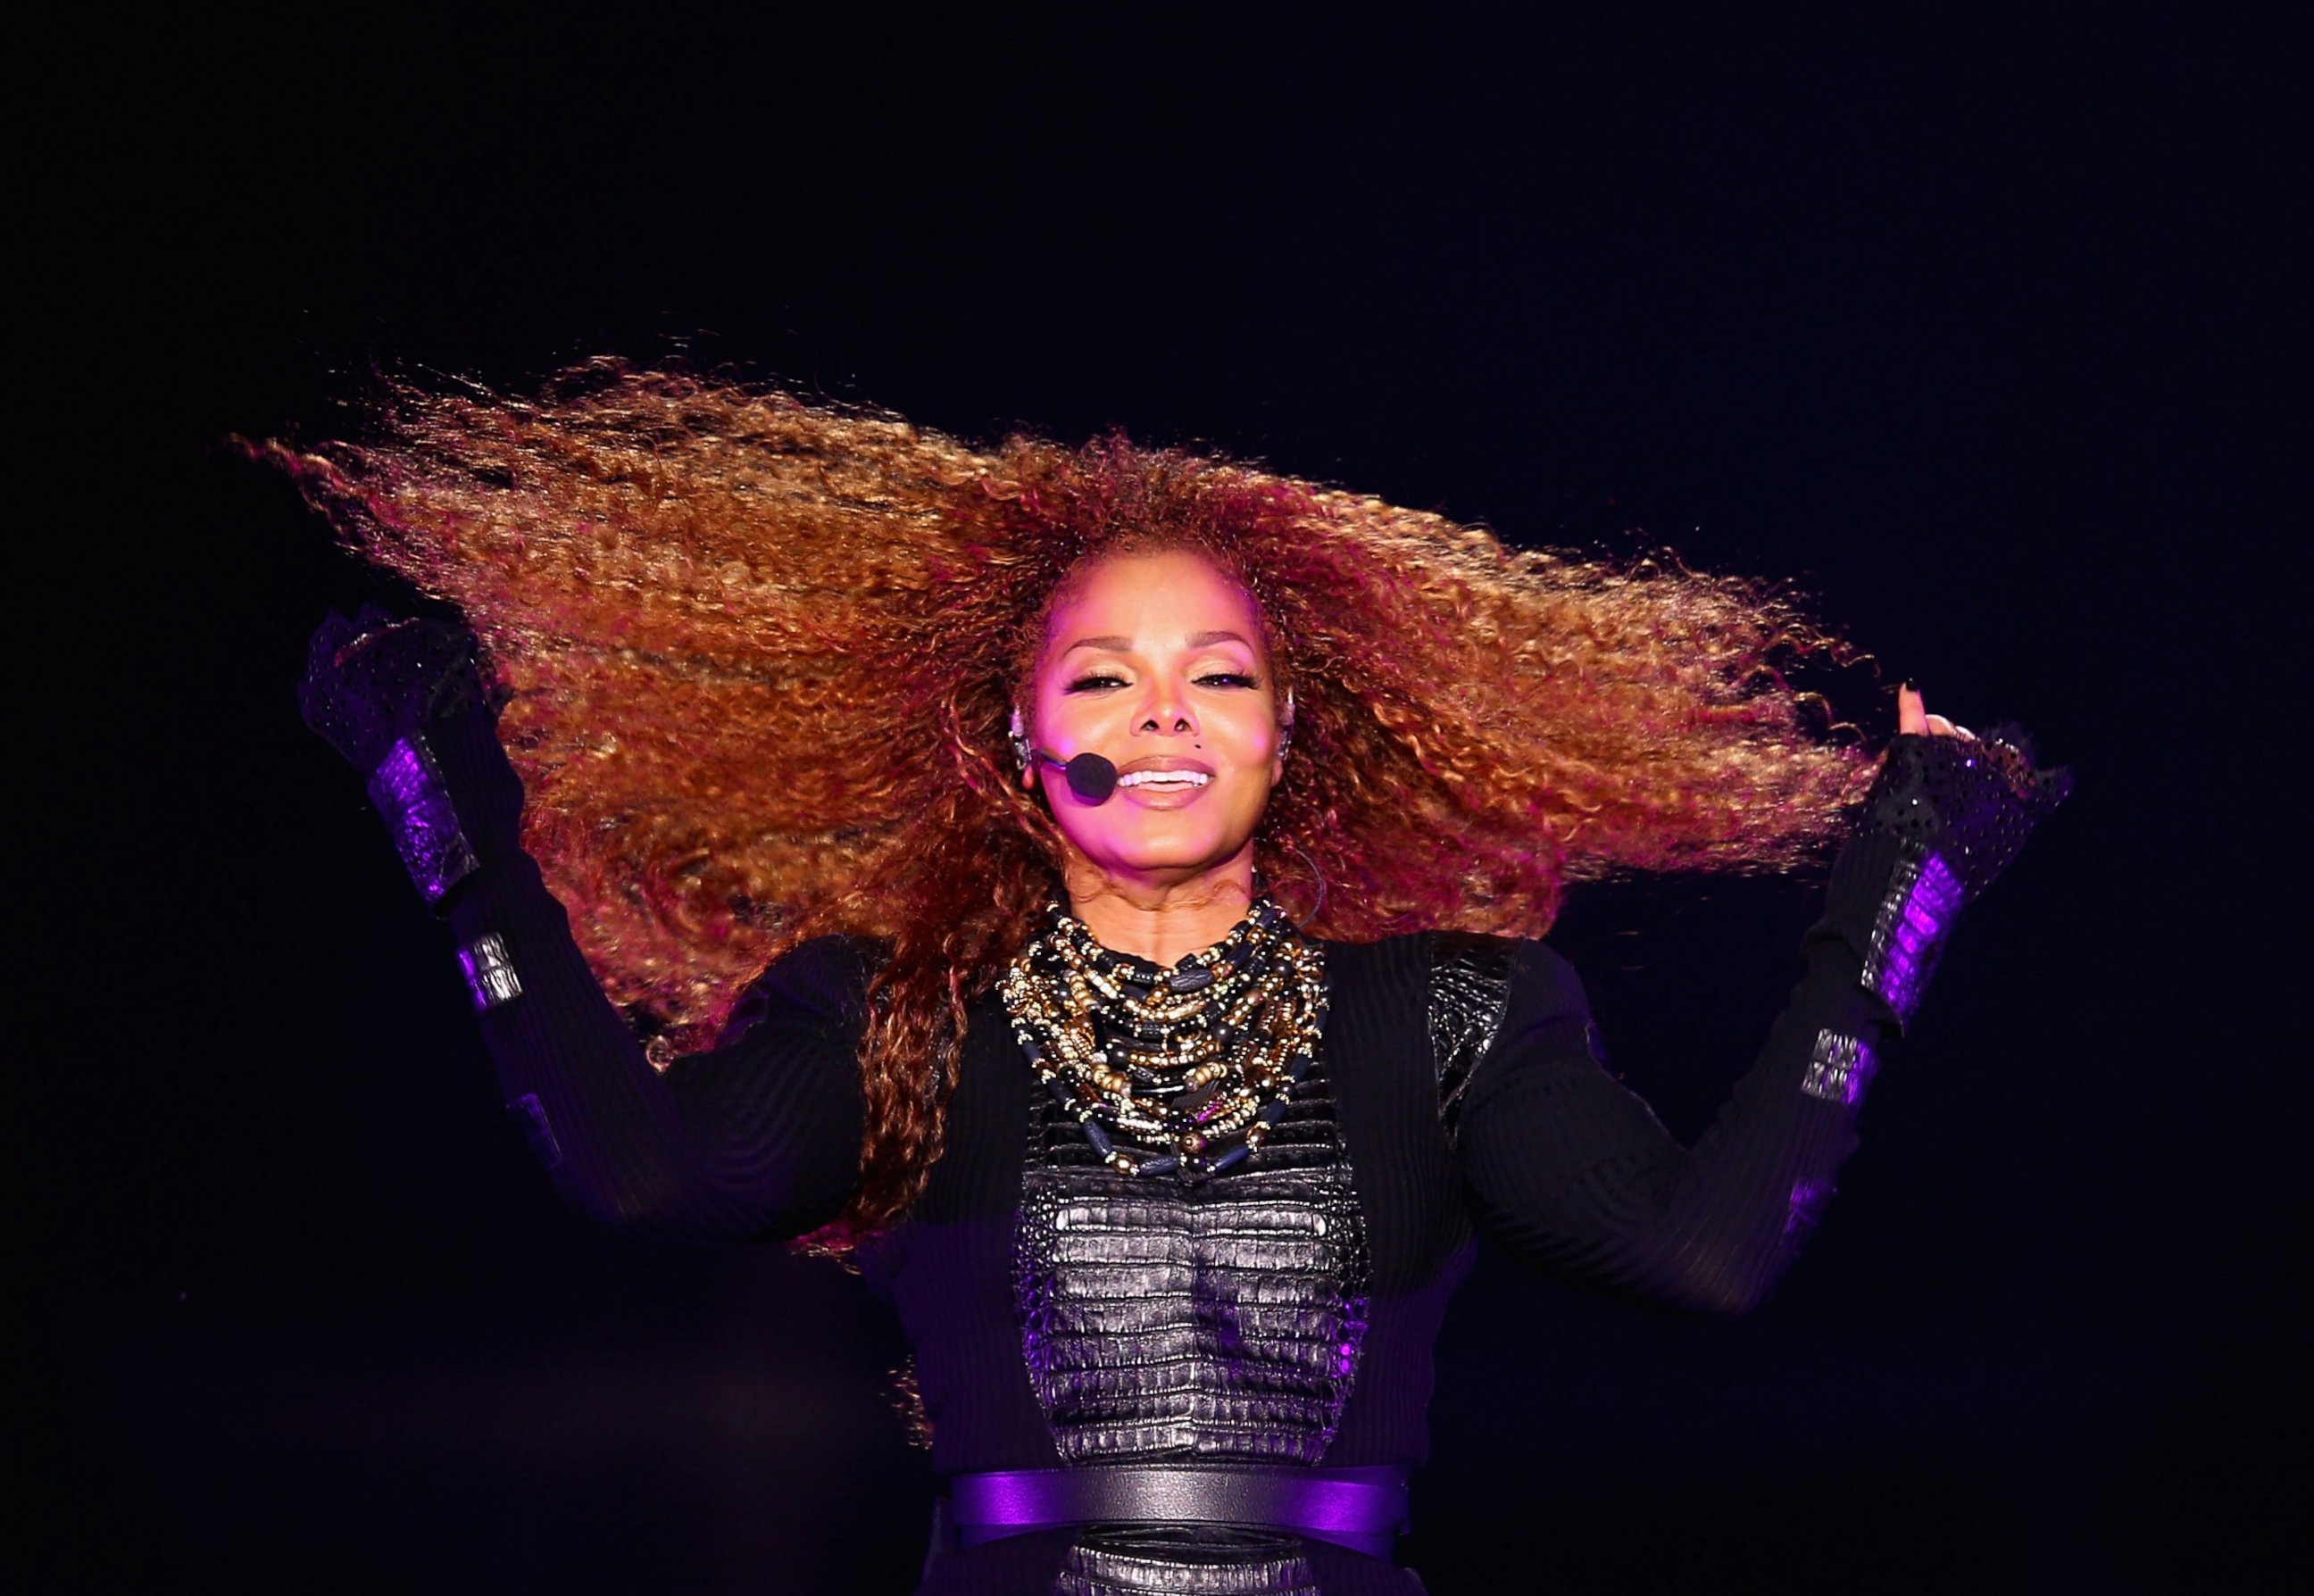 PHOTO: Janet Jackson performs after the Dubai World Cup at the Meydan Racecourse, March 26, 2016 in Dubai, United Arab Emirates.  